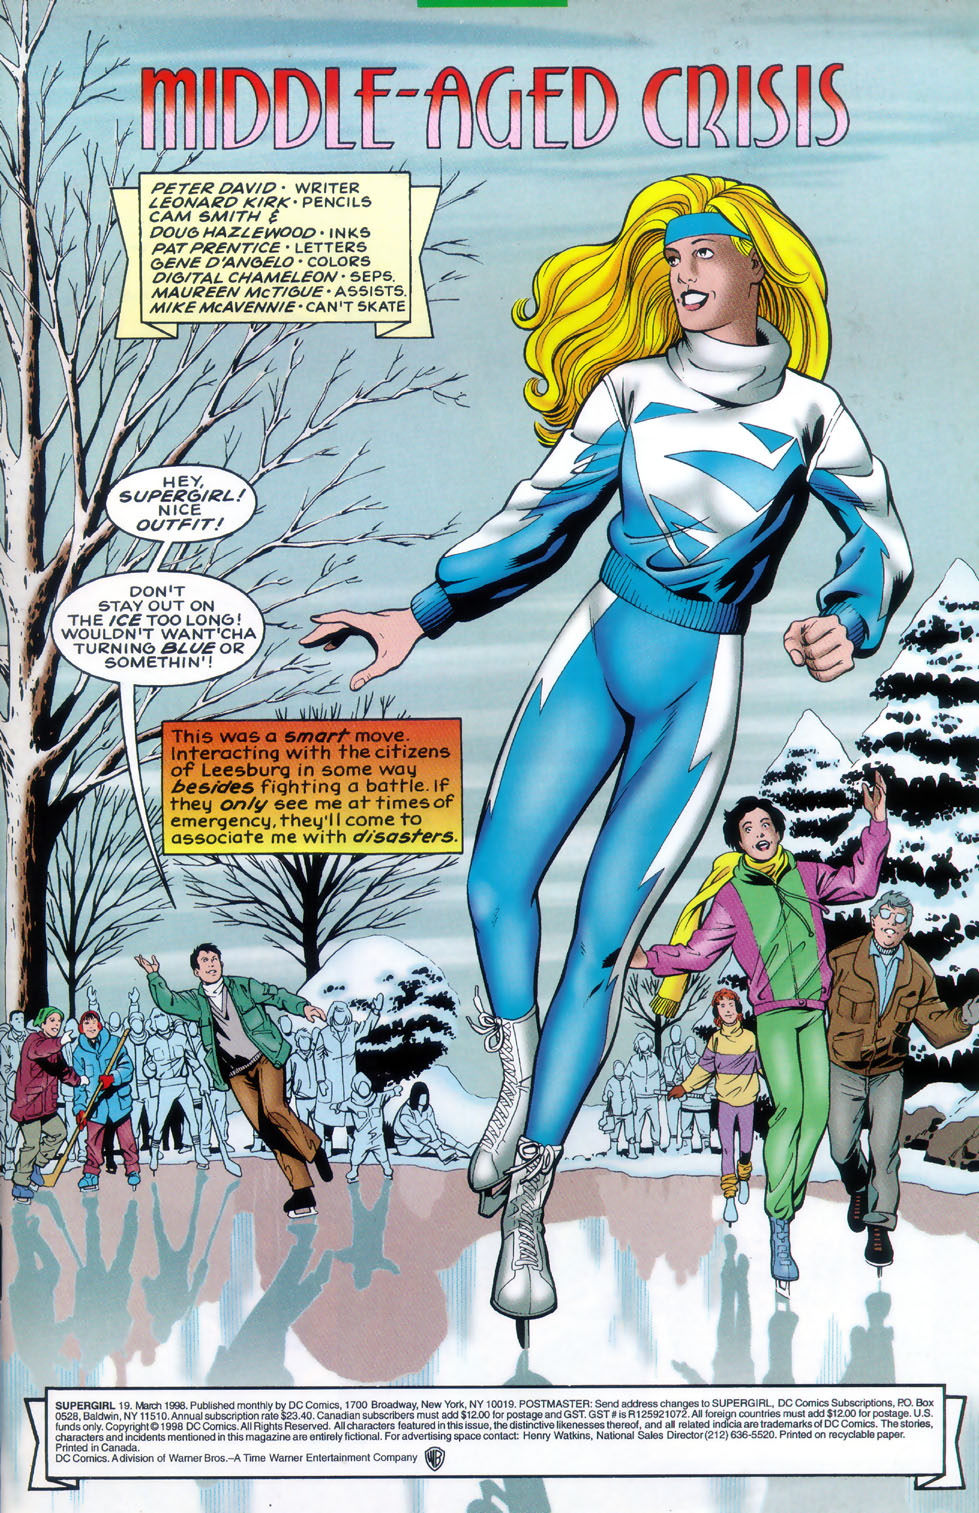 Supergirl skating in a white and blue outfit